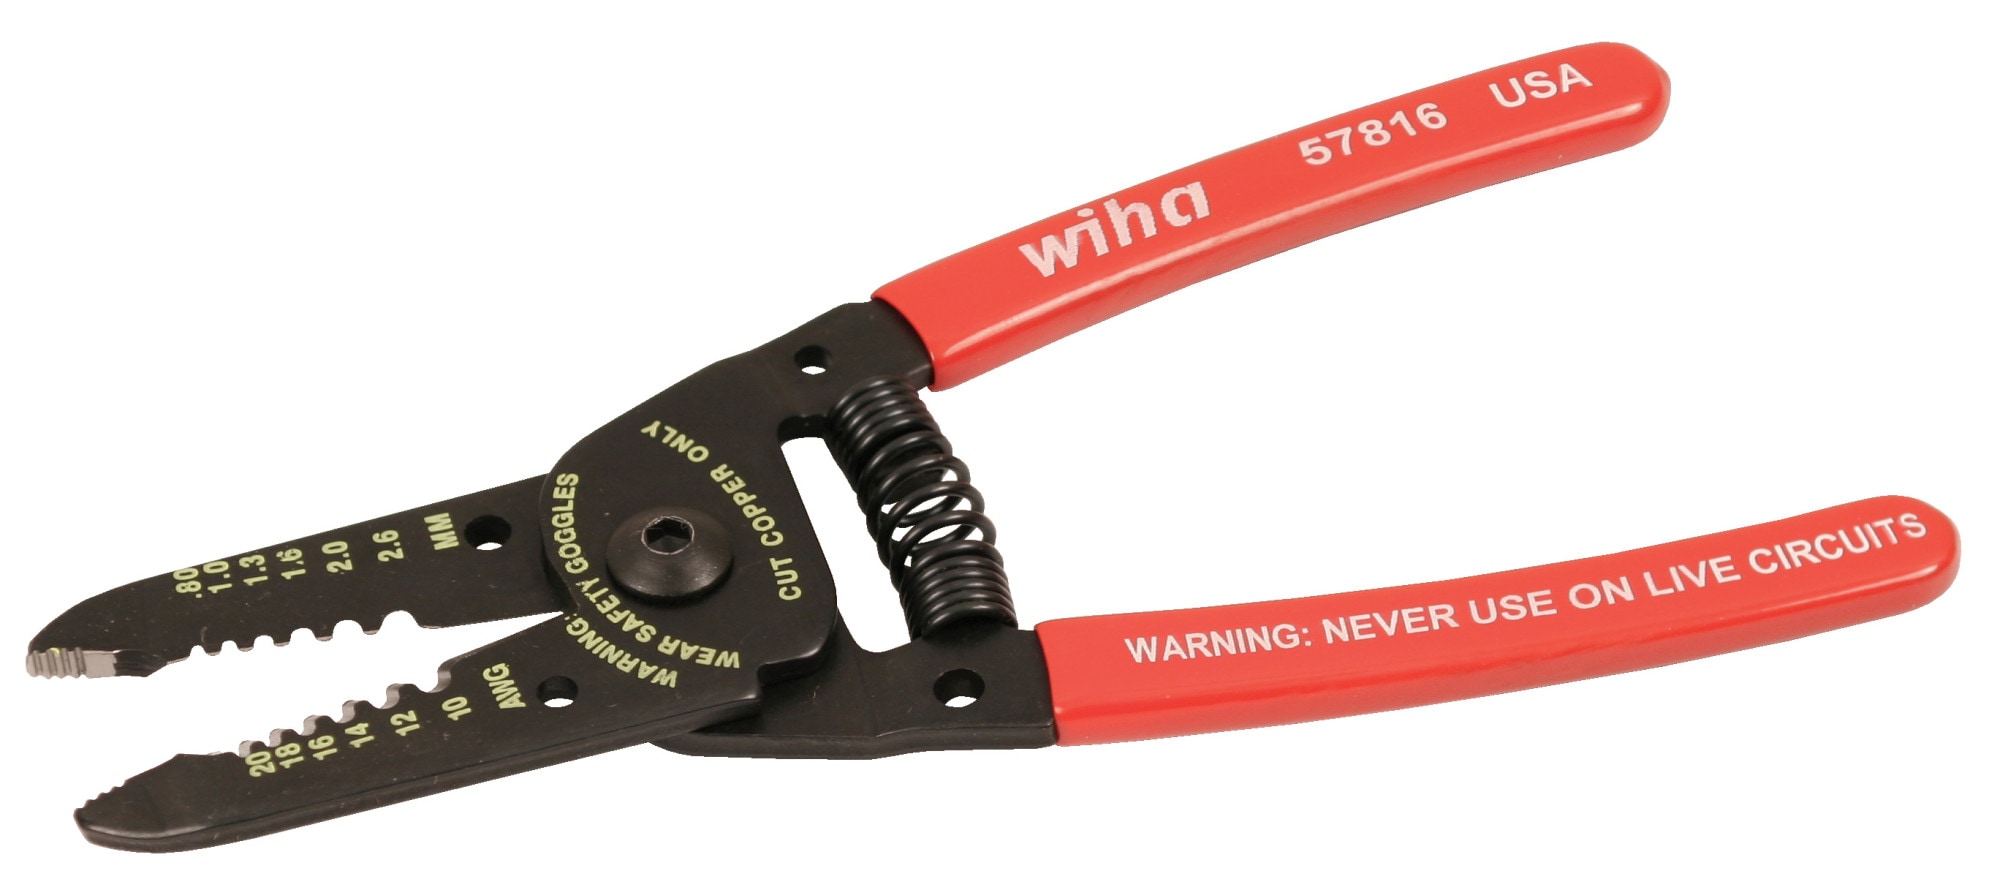 MILBAR 35Z Soft Jaw Pliers, Made in USA, Handling A-N Connectors